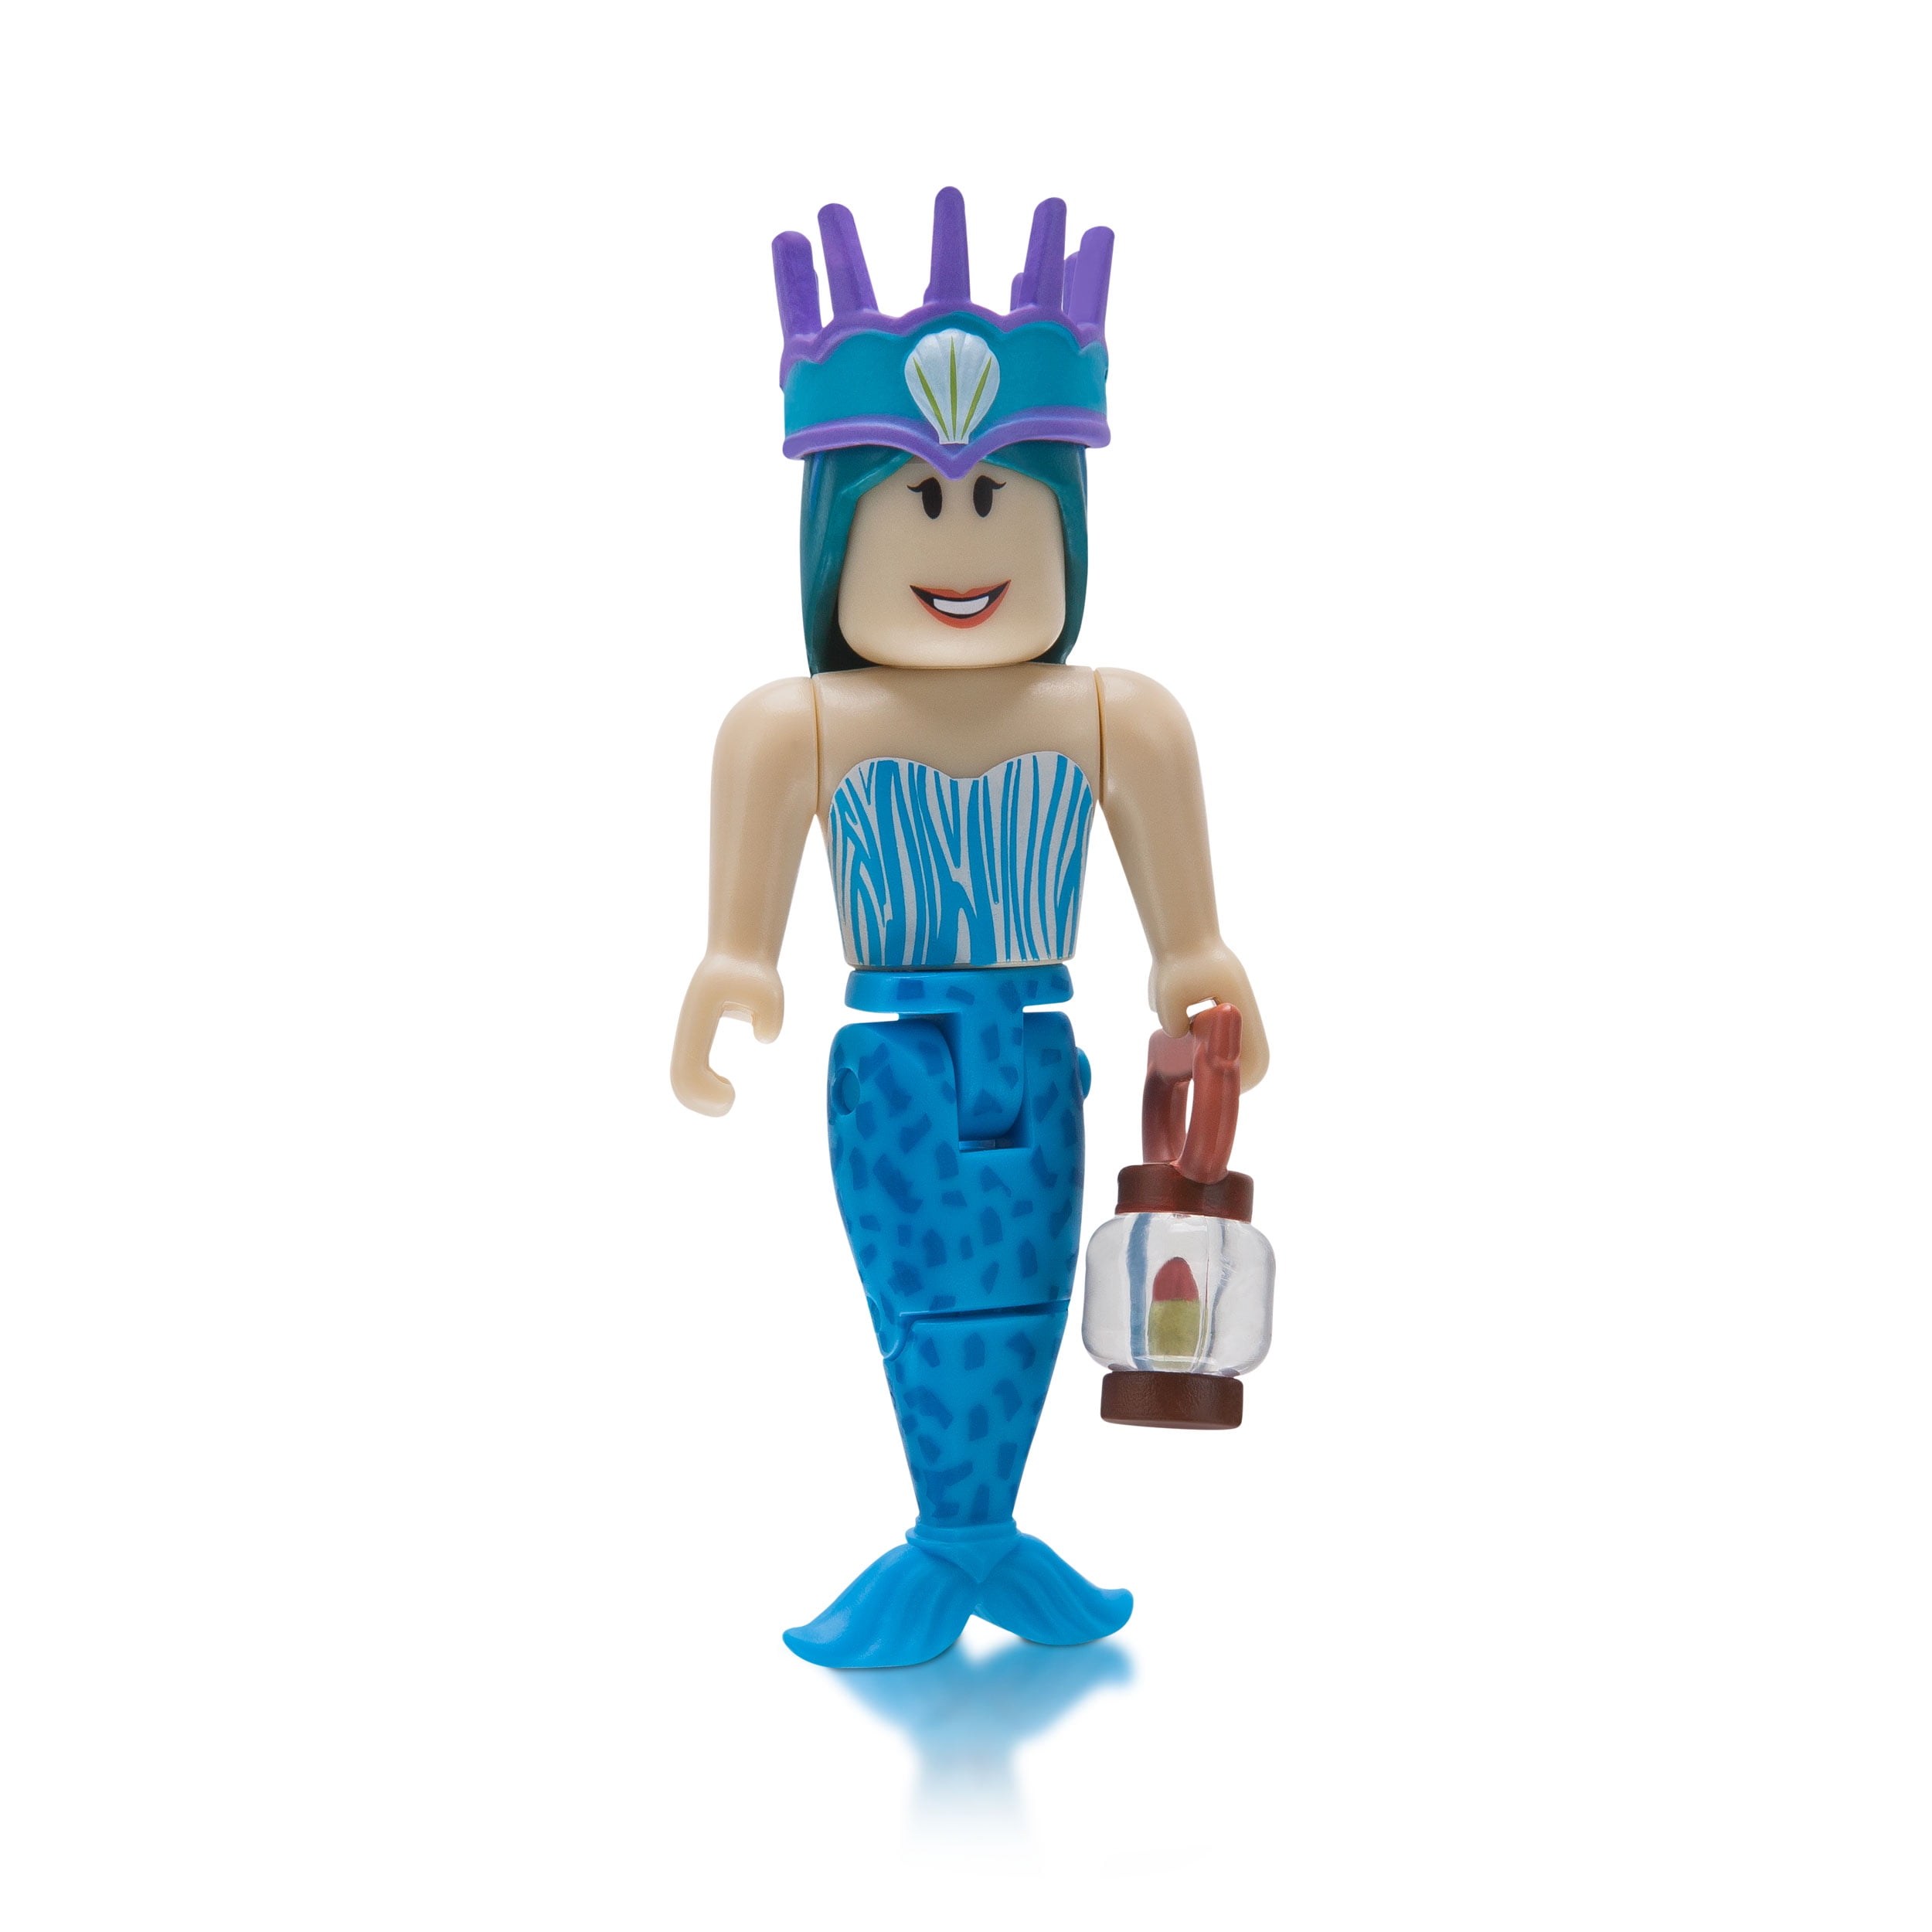 Roblox Celebrity Collection Neverland Lagoon Crown Collector Figure Pack Includes Exclusive Virtual Item Walmart Com Walmart Com - roblox neverland lagoon celebrity collection 4 figure pack w